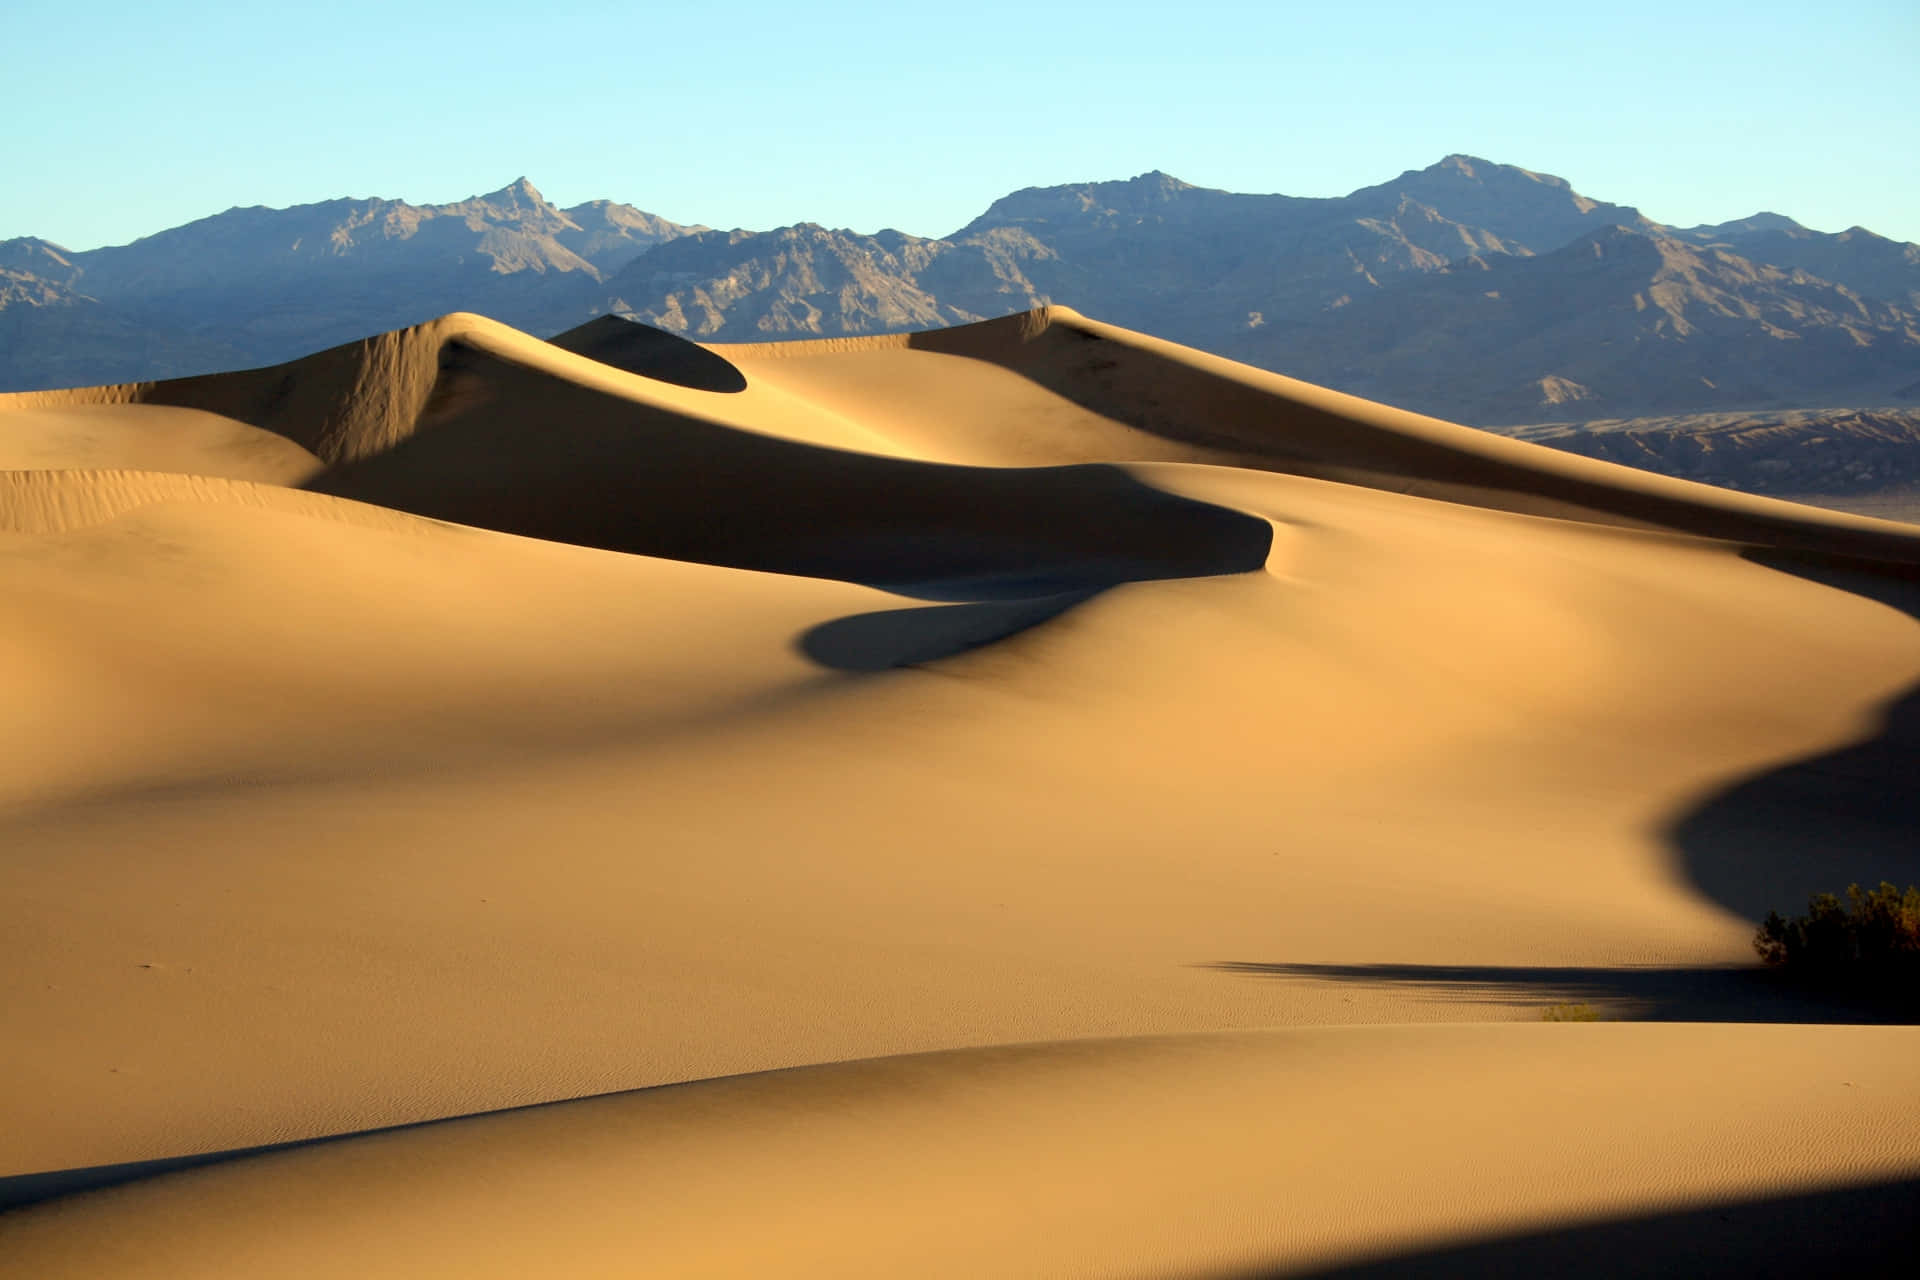 A stunning view of the sand dunes of Arrakis.